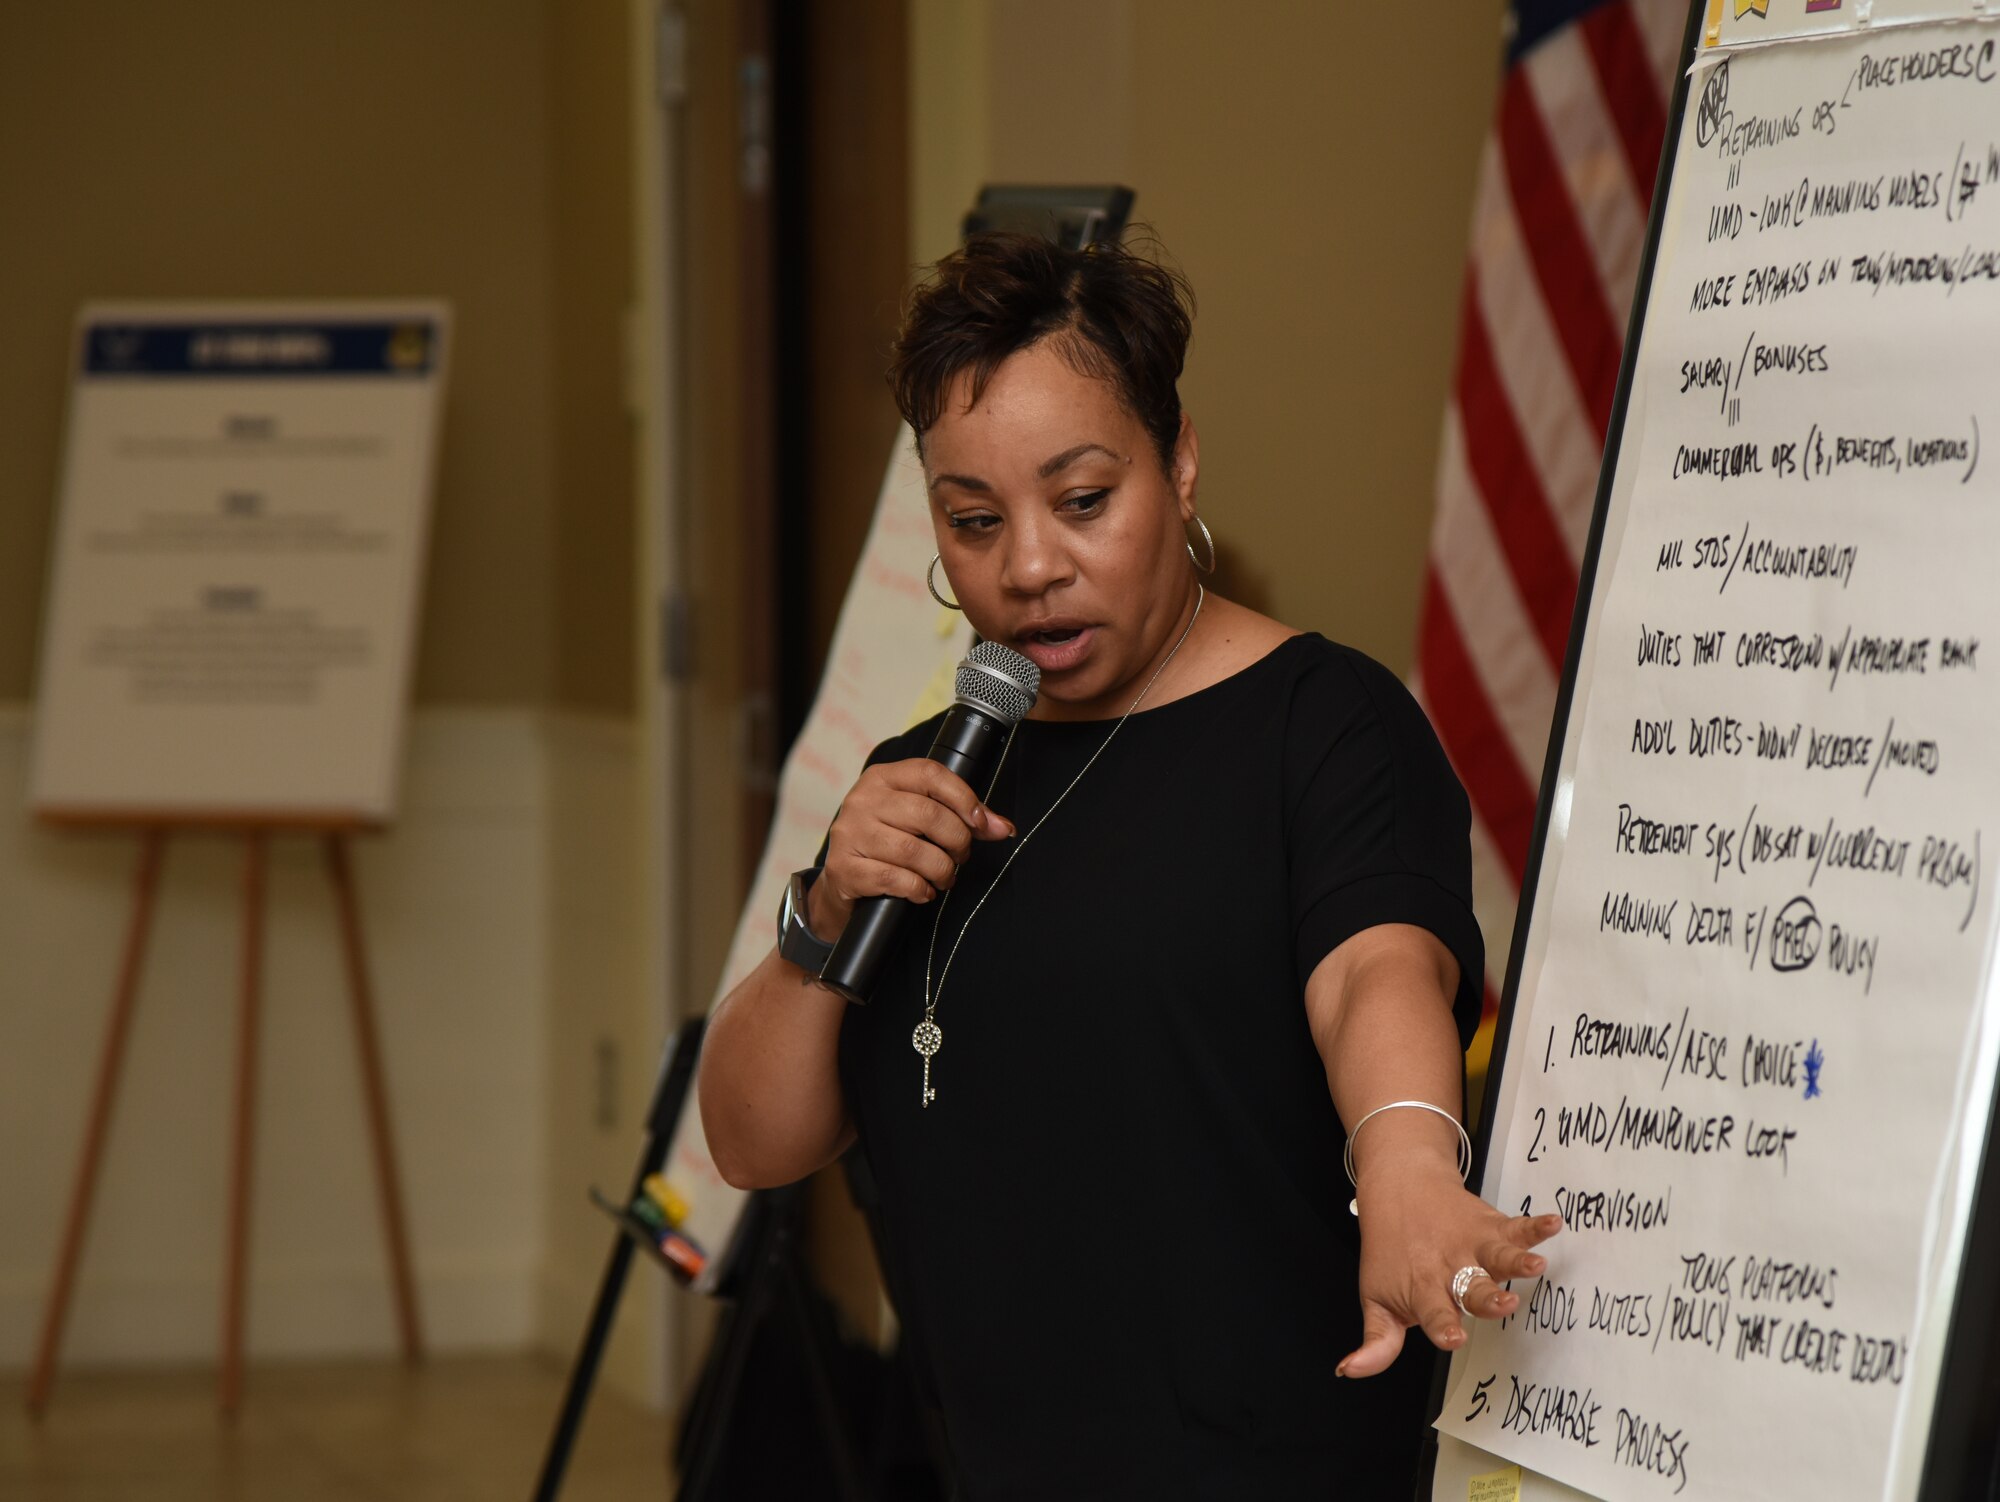 U.S. Air Force Chief Master Sgt. Tanya Johnson, 81st Diagnostic and Therapeutics Squadron superintendent, reviews notes taken during a small group discussion during the 81st Training Wing Spring 2018 Off-Site Commander’s Conference at The Salvation Army Kroc Center in Biloxi, Mississippi, May 2, 2018. Keesler leadership participated in the two-day event that allowed senior leaders to step away from their day-to-day activities and focus on improving themselves as leaders. (U.S. Air Force photo by Kemberly Groue)